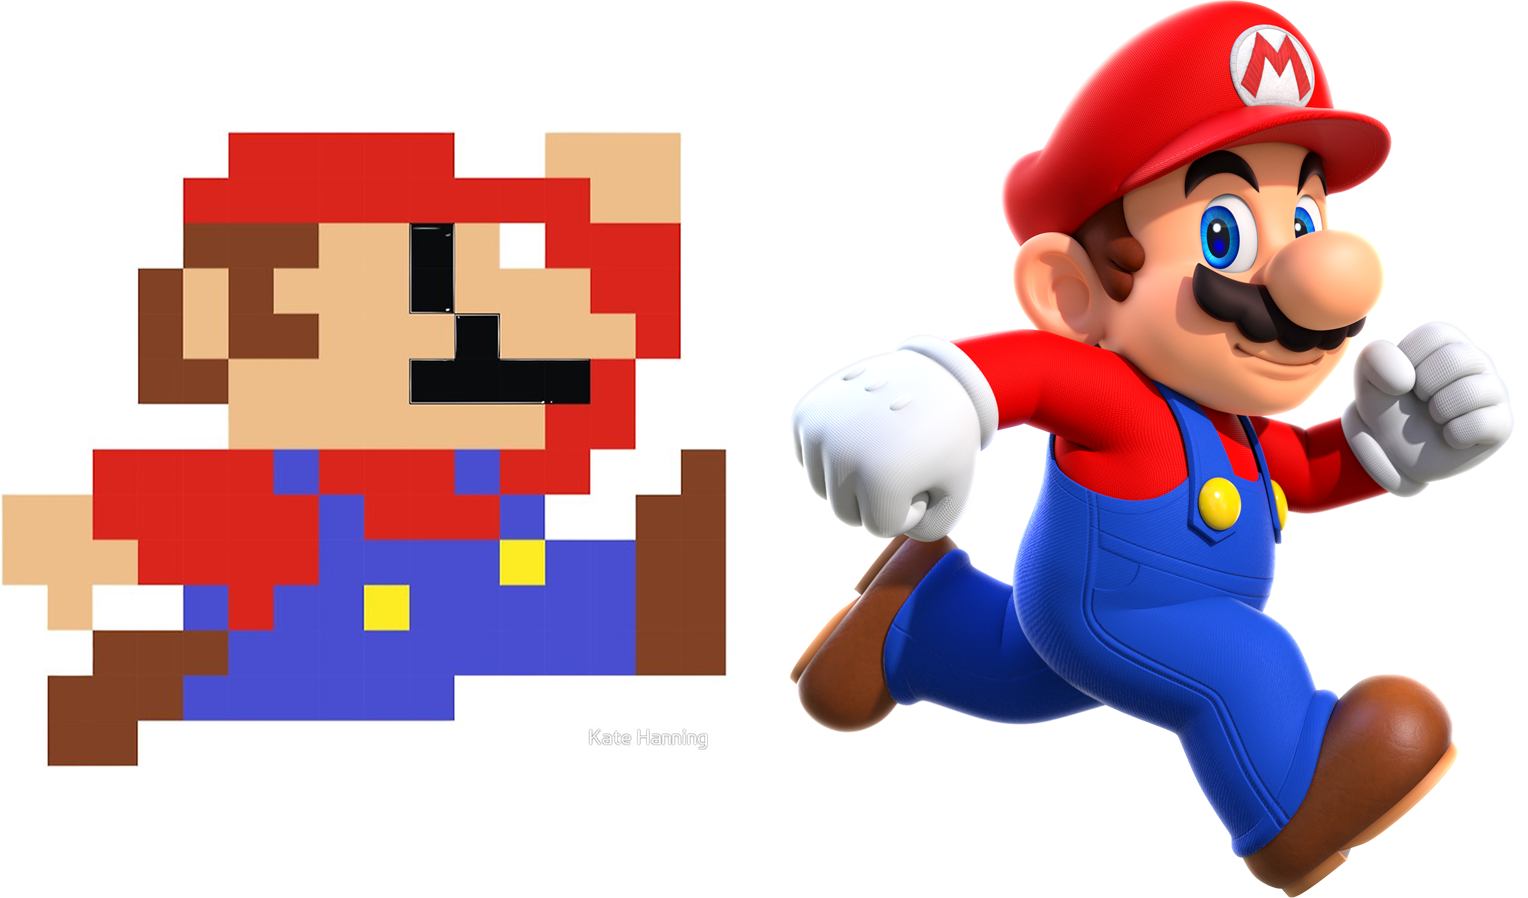 Mario at 2 different resolutions